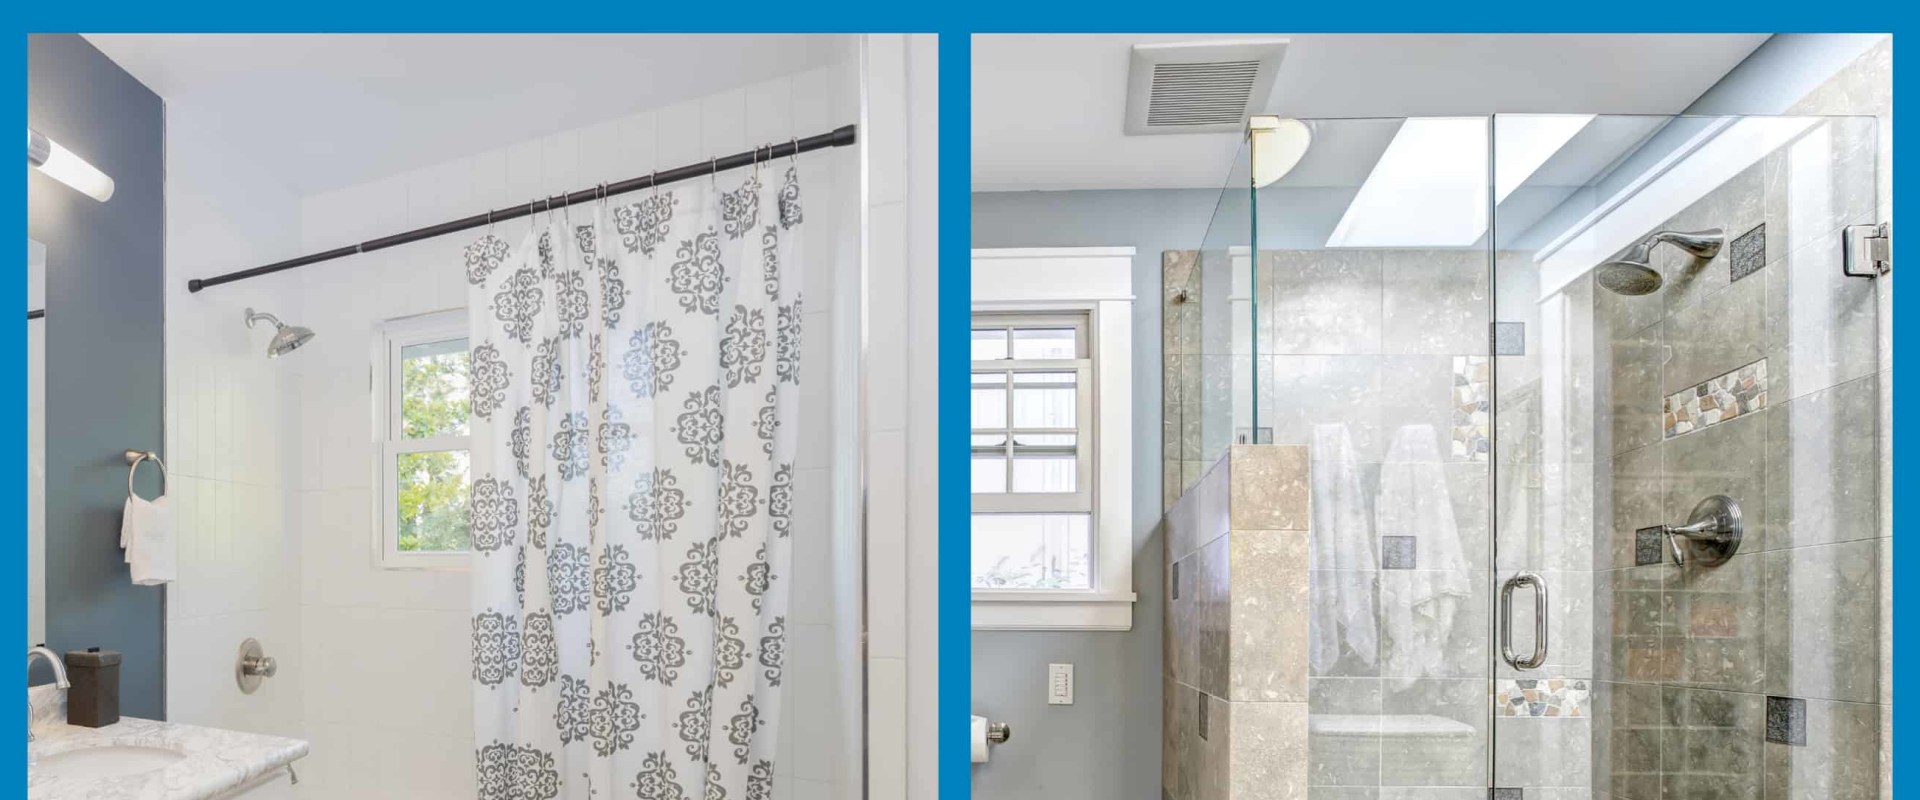 Why People Love Glass Shower Doors